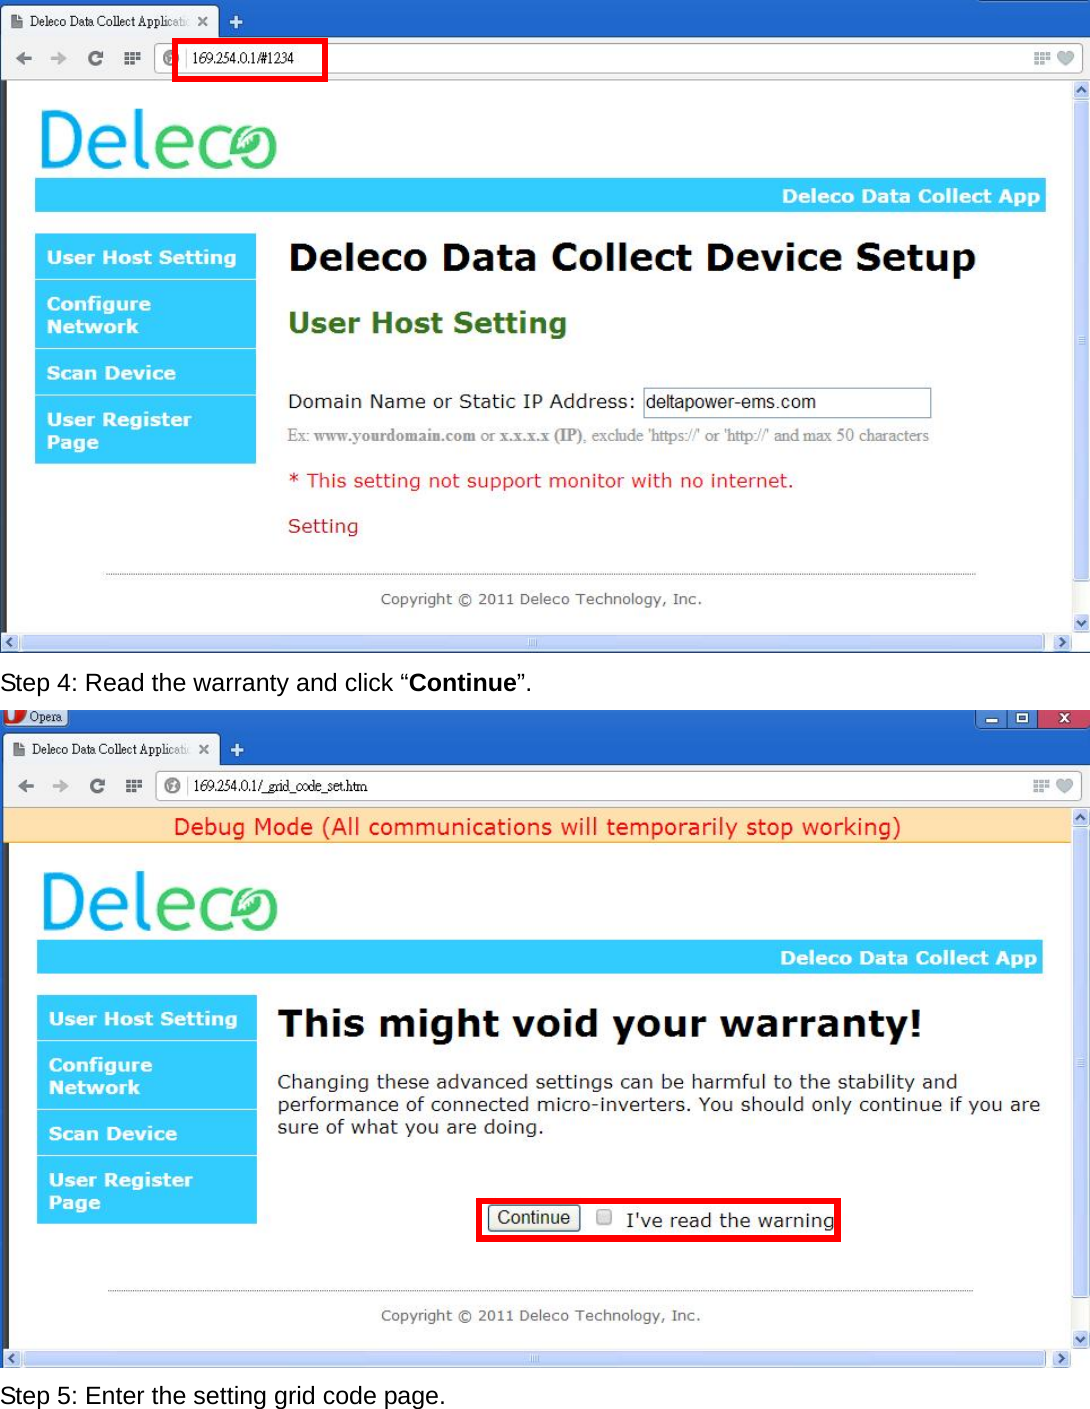  Step 4: Read the warranty and click “Continue”.   Step 5: Enter the setting grid code page.   